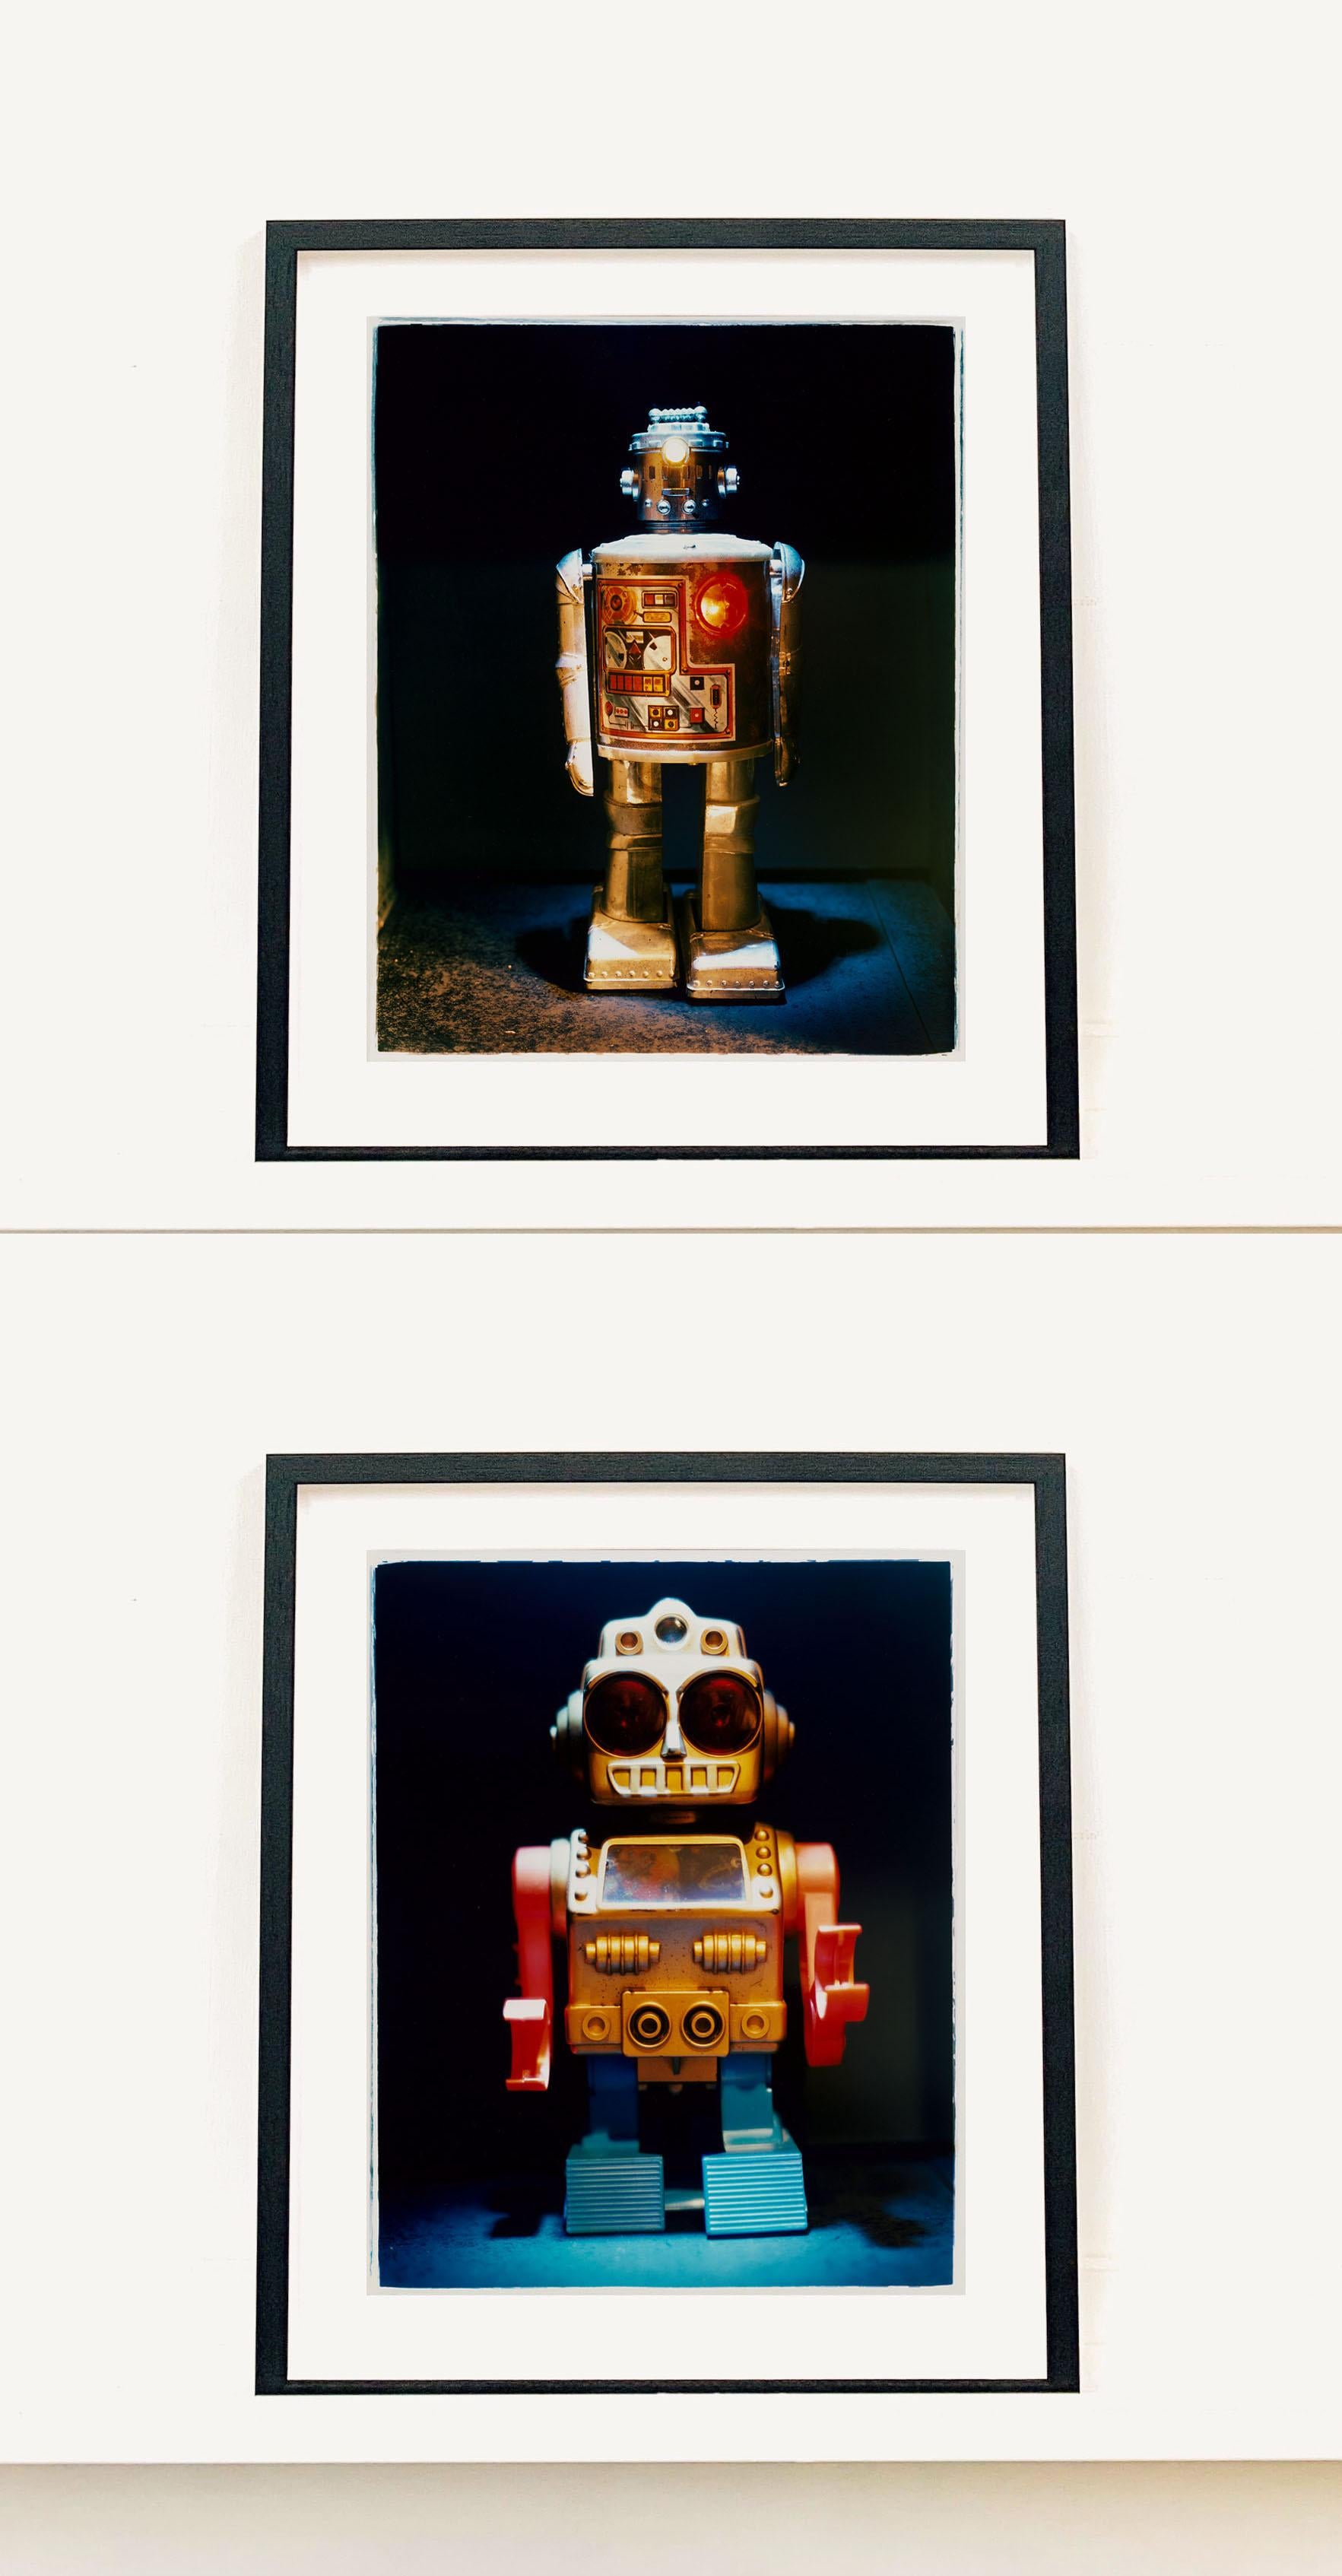 Natasha Heidler brings childhood favorite toys to life in her conceptual photography.

This listing is for two artworks, each is a limited edition of 25, gloss photographic print, dry-mounted to aluminium, presented in a museum board white window